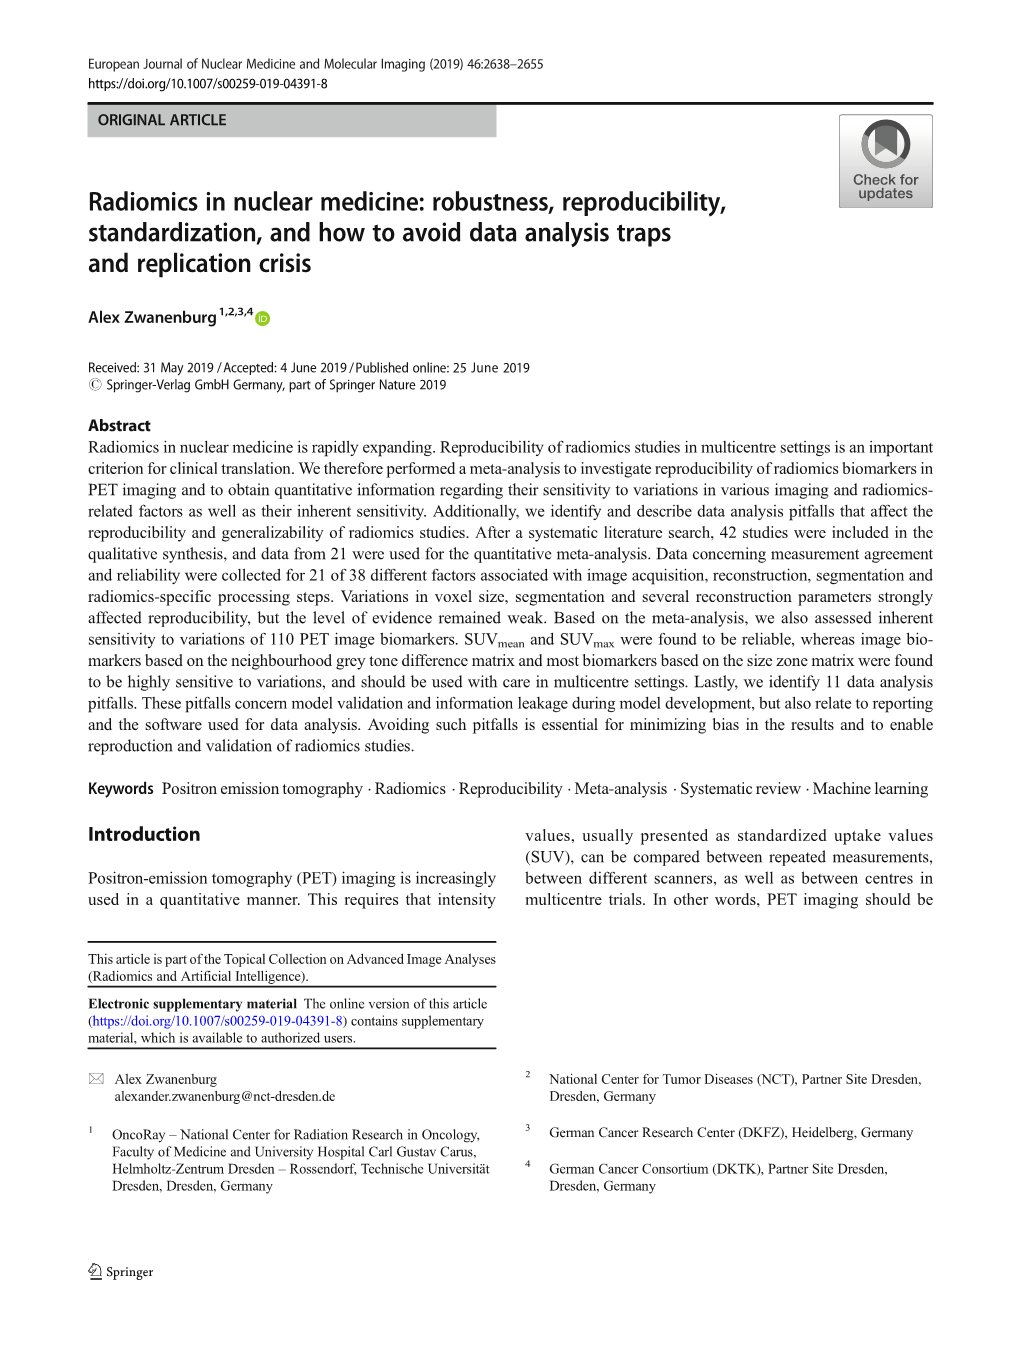 Radiomics in Nuclear Medicine: Robustness, Reproducibility, Standardization, and How to Avoid Data Analysis Traps and Replication Crisis